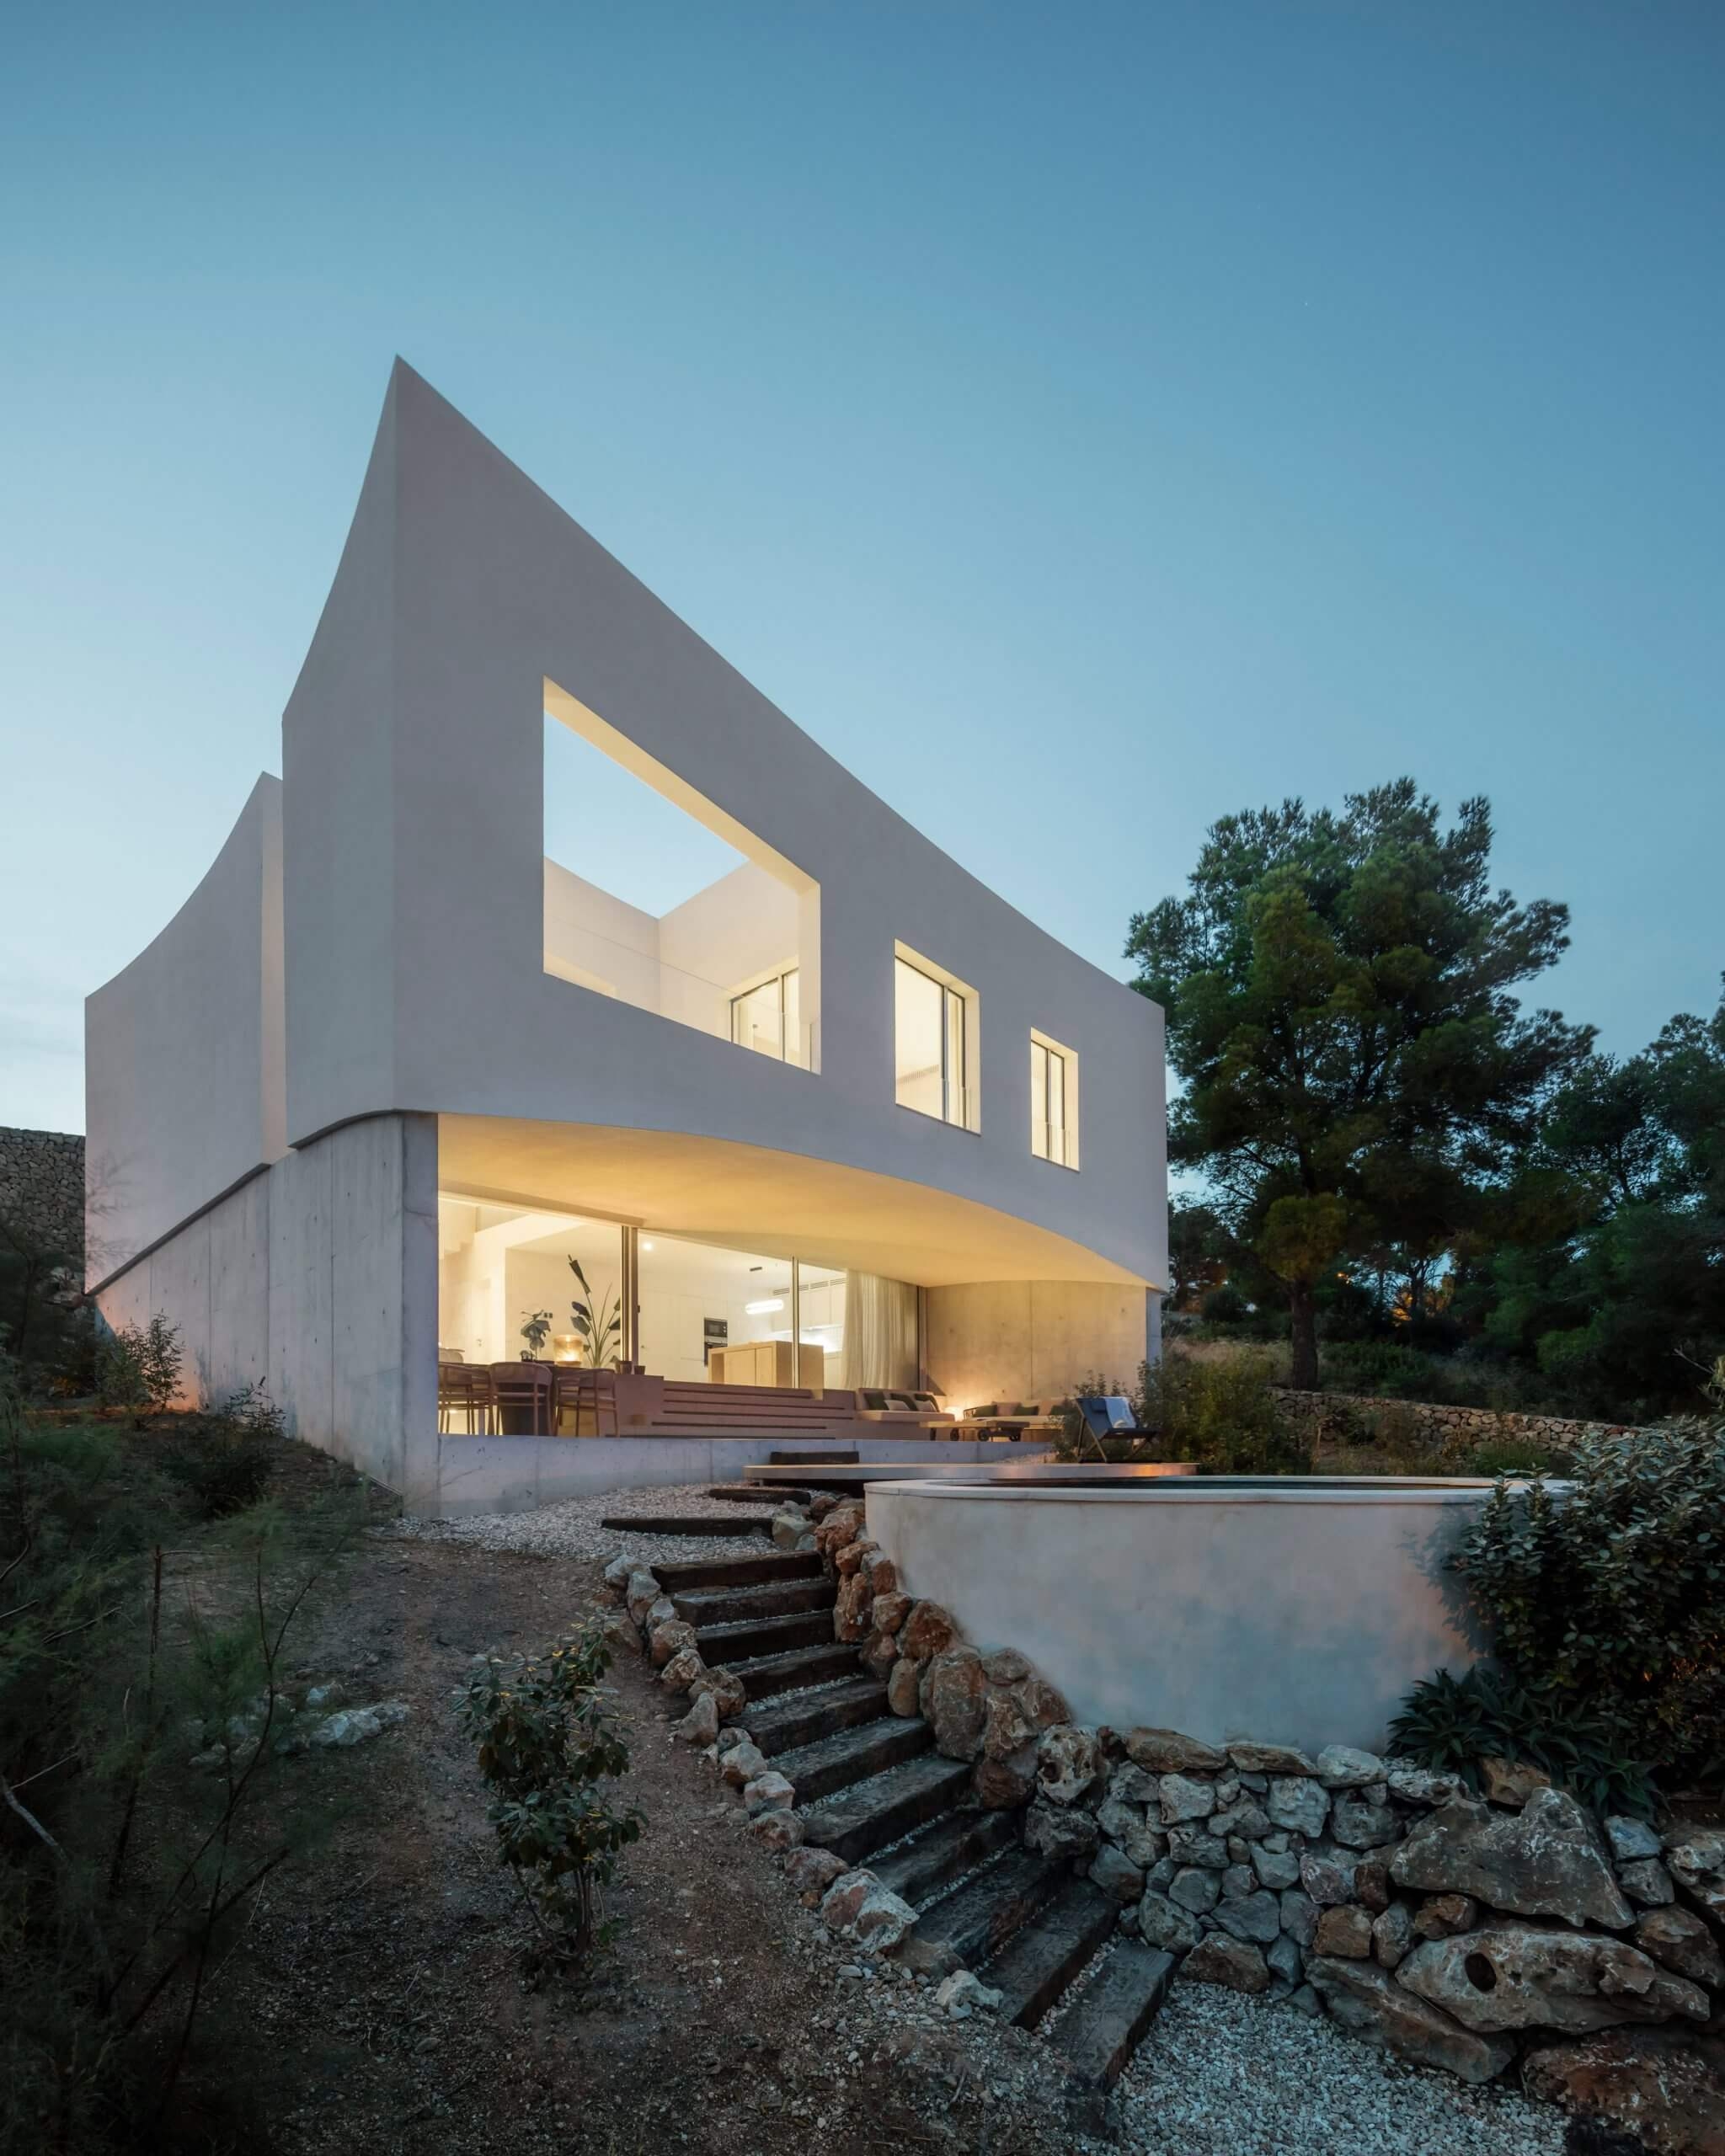 nomo studio curved house menorca spain architecture residential dezeen 2364 col scaled 1